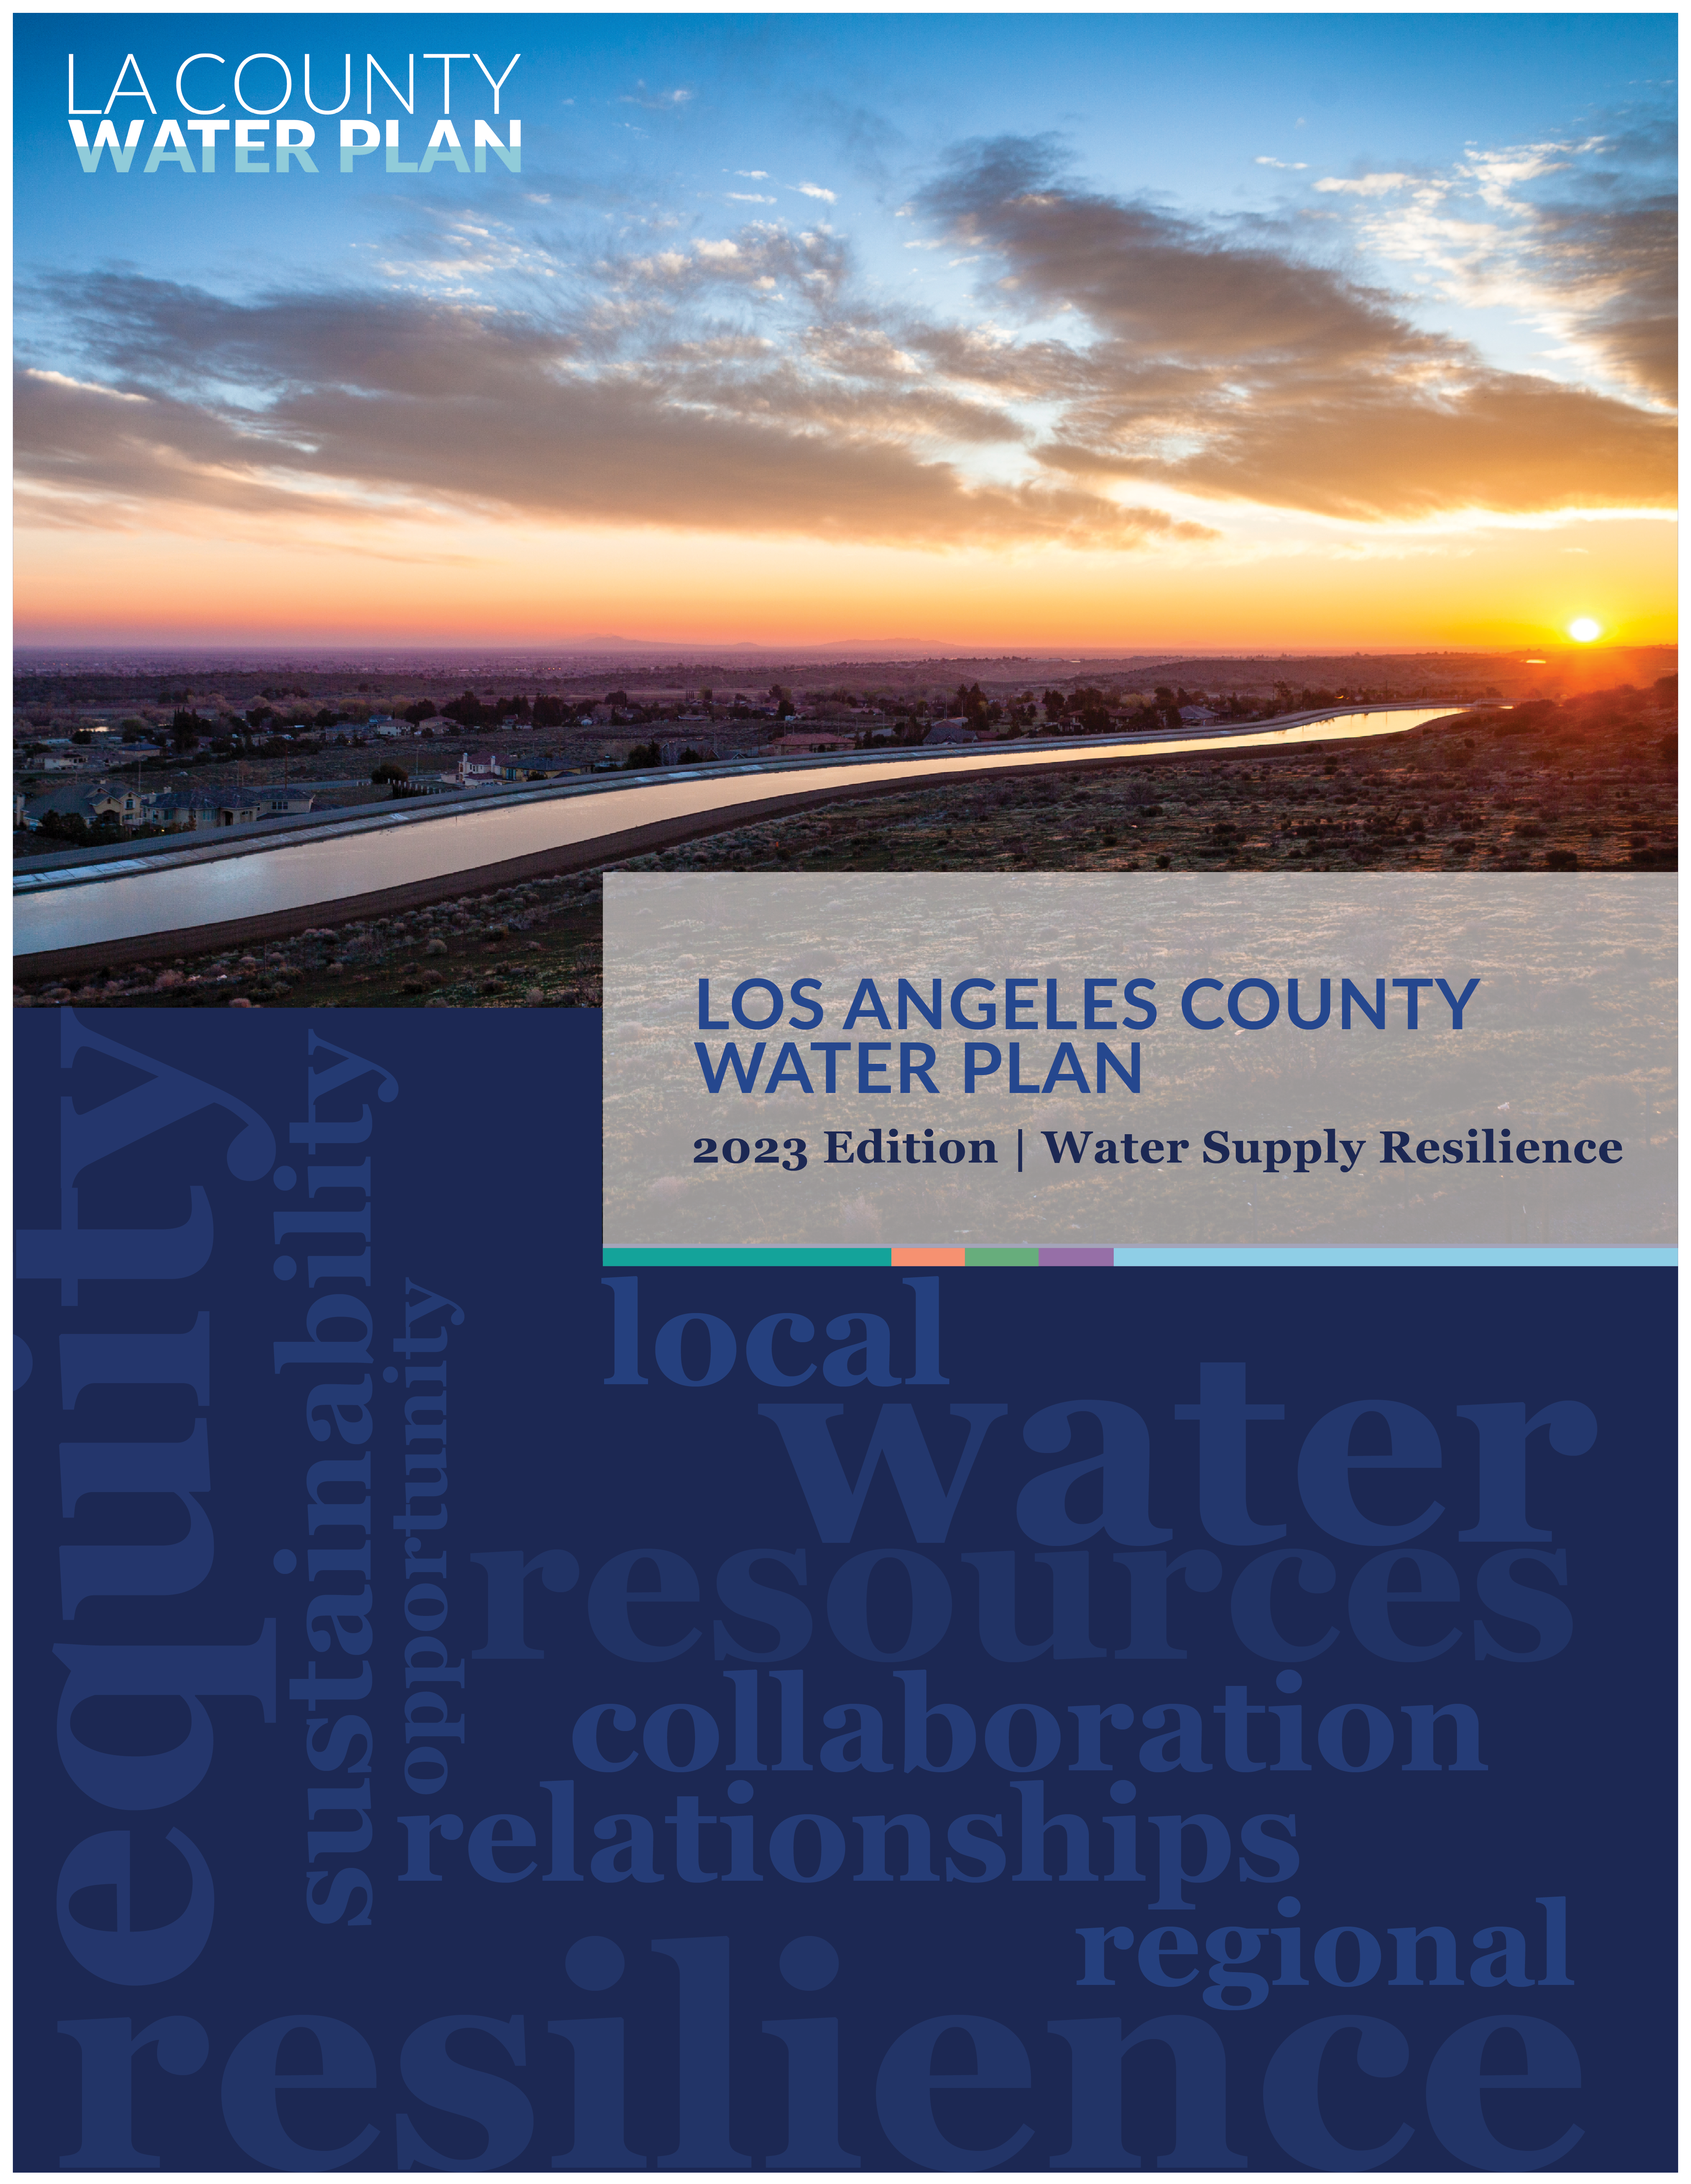 Embedded Los Angeles CWP booklet to browse plan pages 